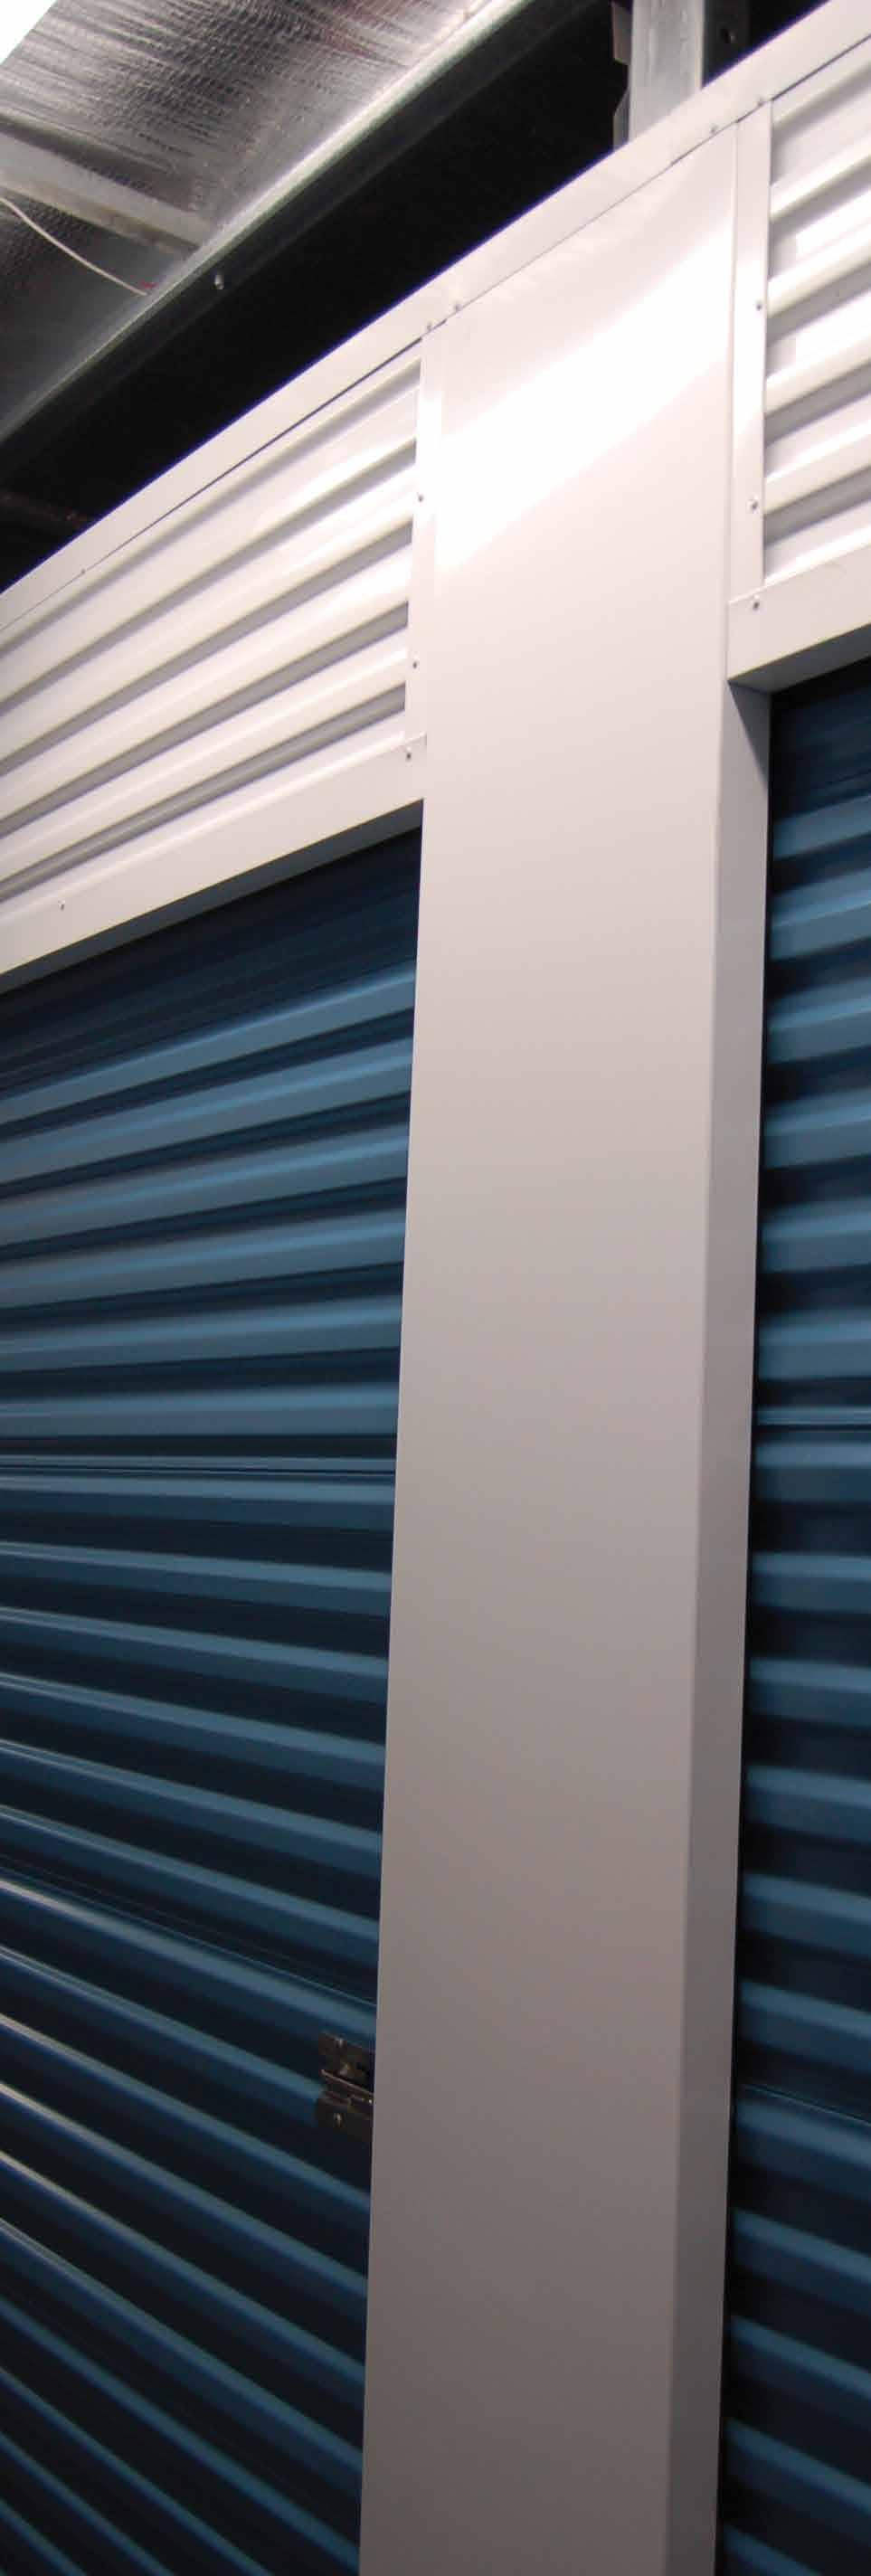 Our self-storage doors and solutions are fabricated to meet the demands of the industry. They provide quick-and-easy installation, minimal maintenance, superior strength and exceptional durability.